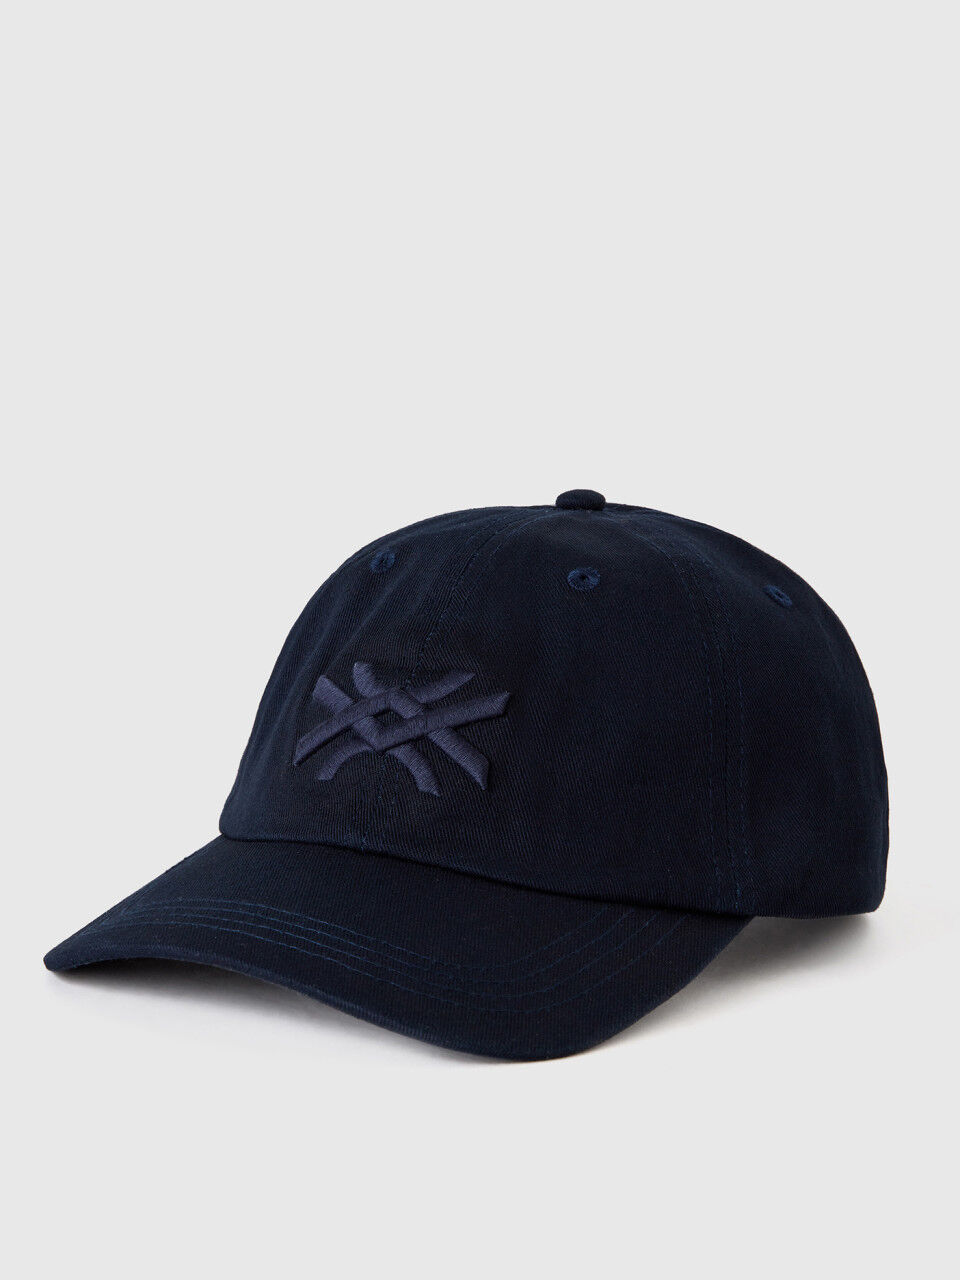 Dark blue cap with embroidered logo